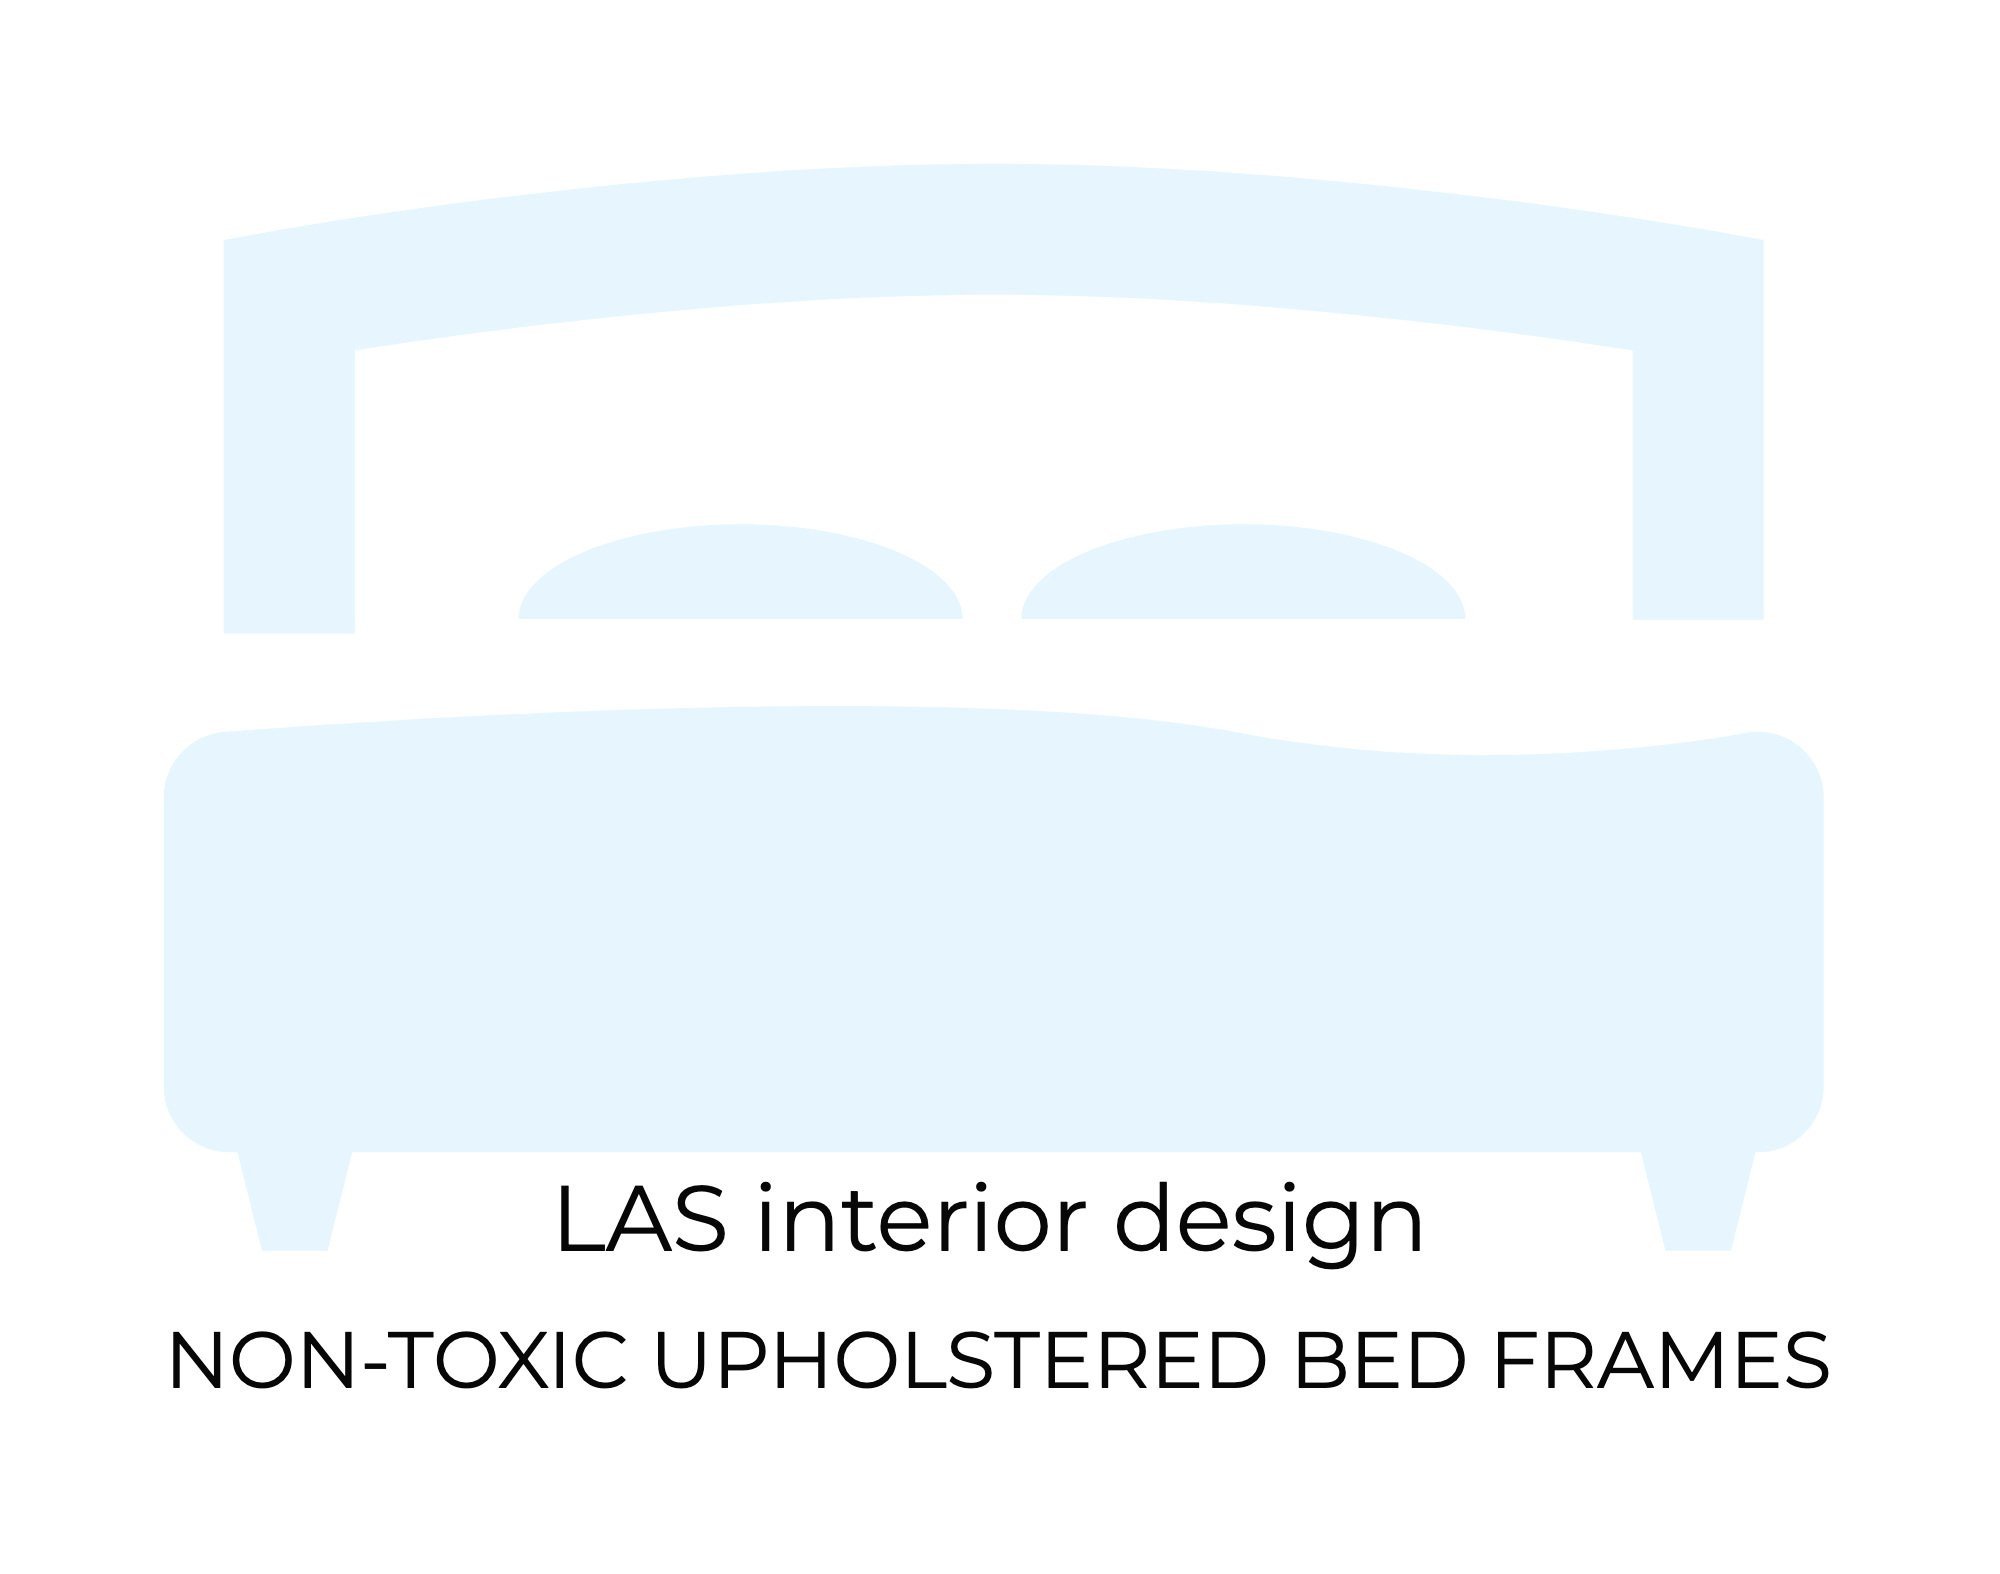 Non-Toxic Upholstered Bed Frames